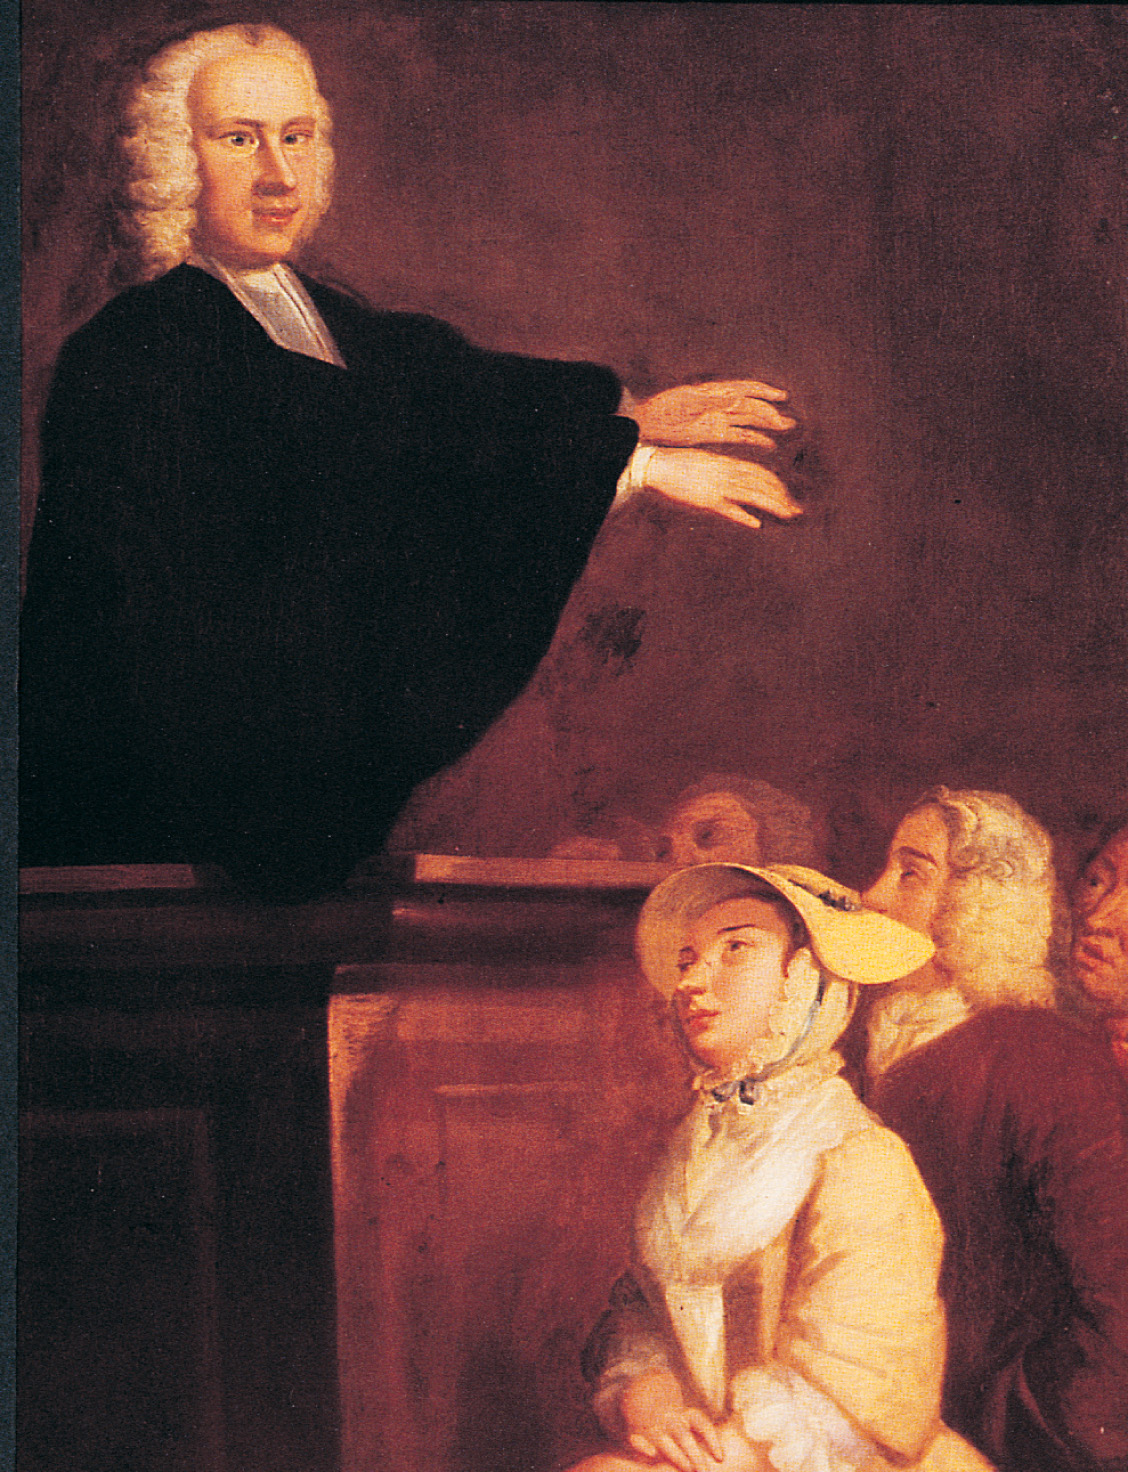 painting: George Whitfield gives a sermon.